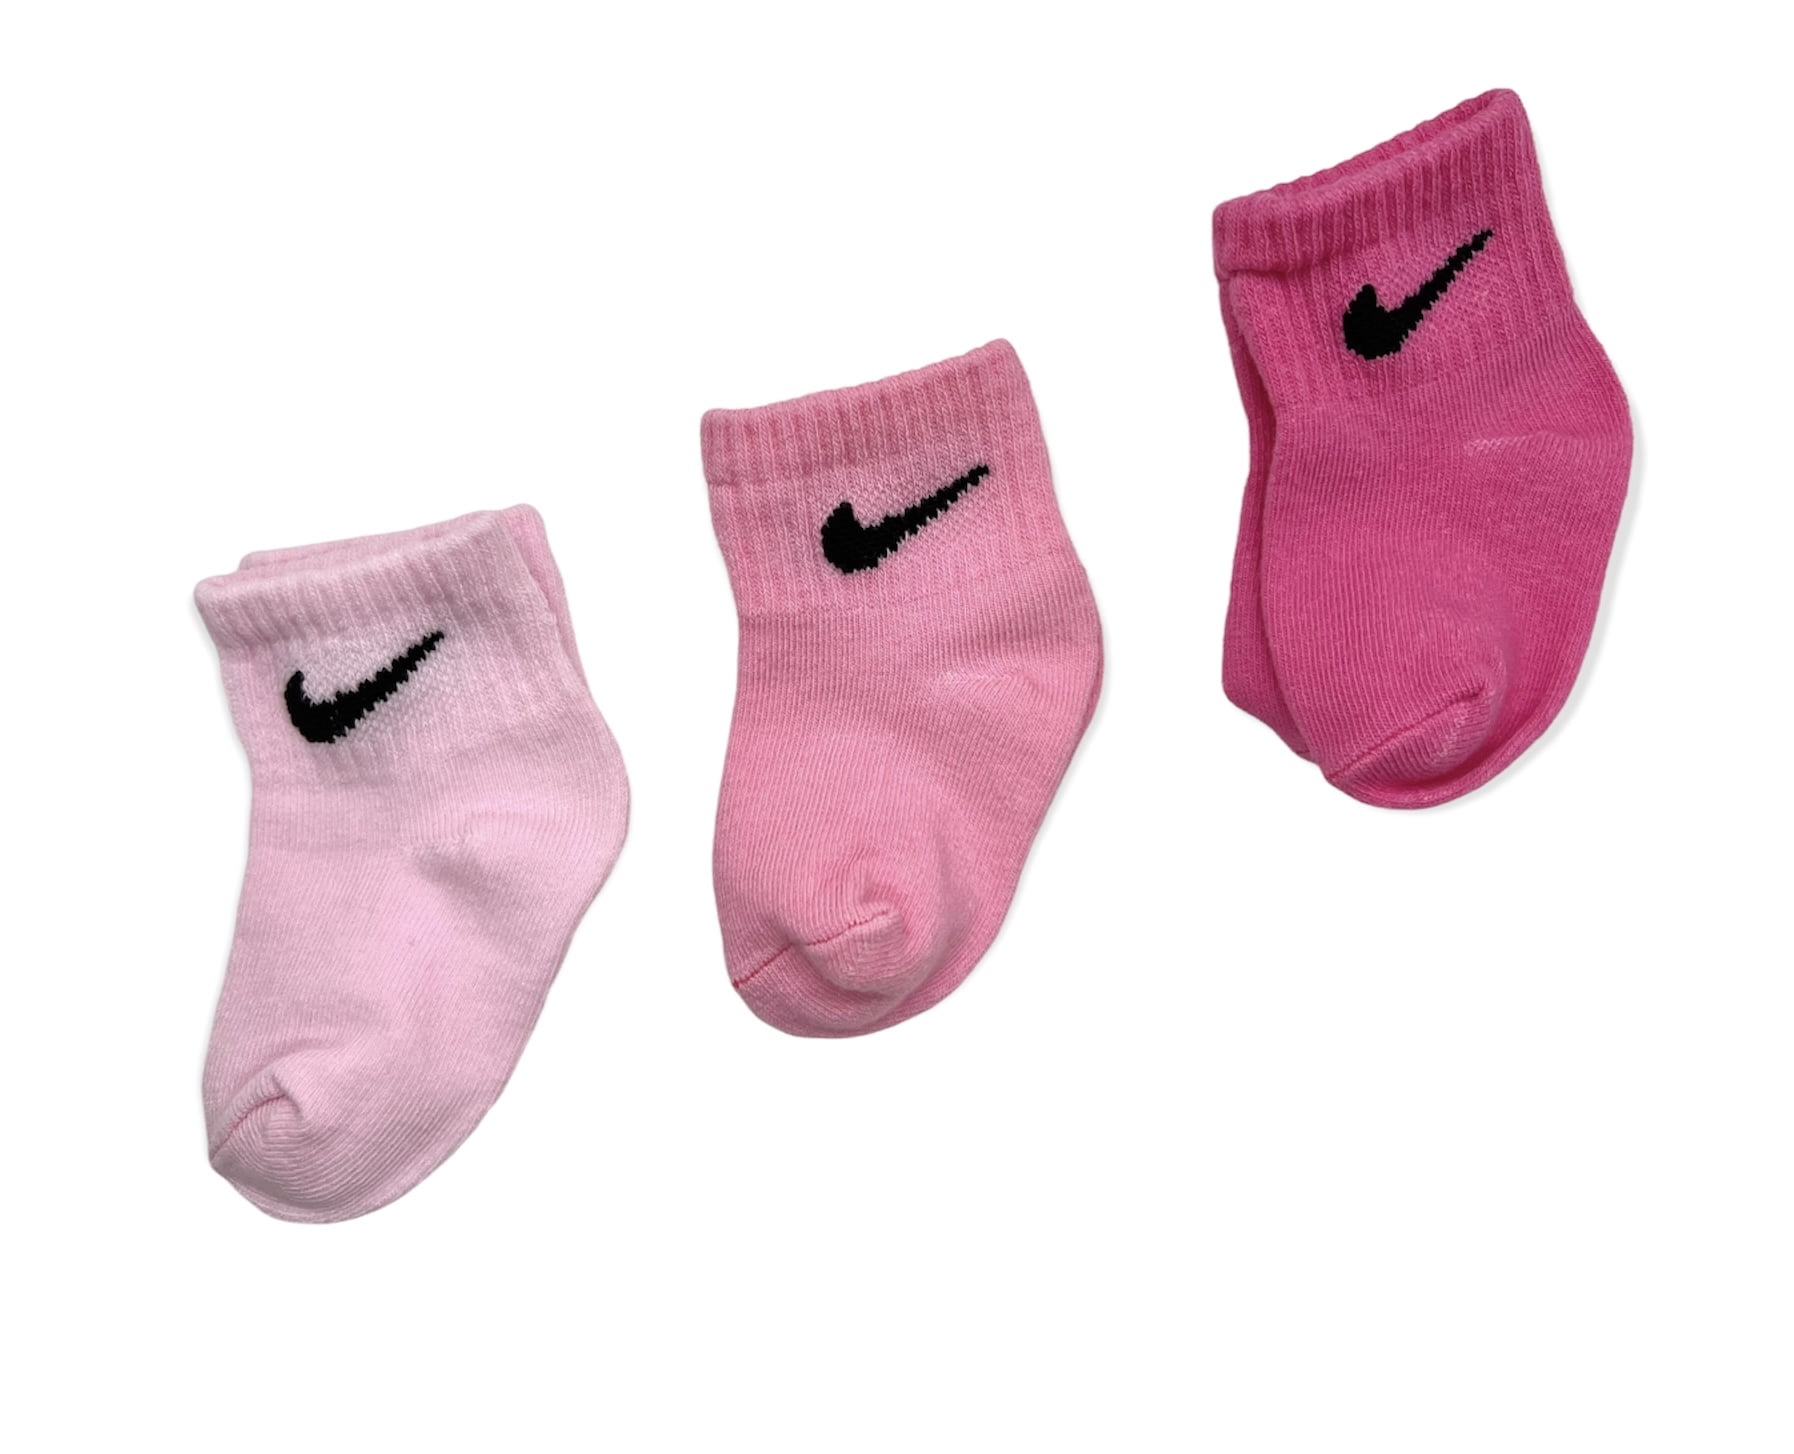 chip johns recommends Pink Nike Ankle Socks